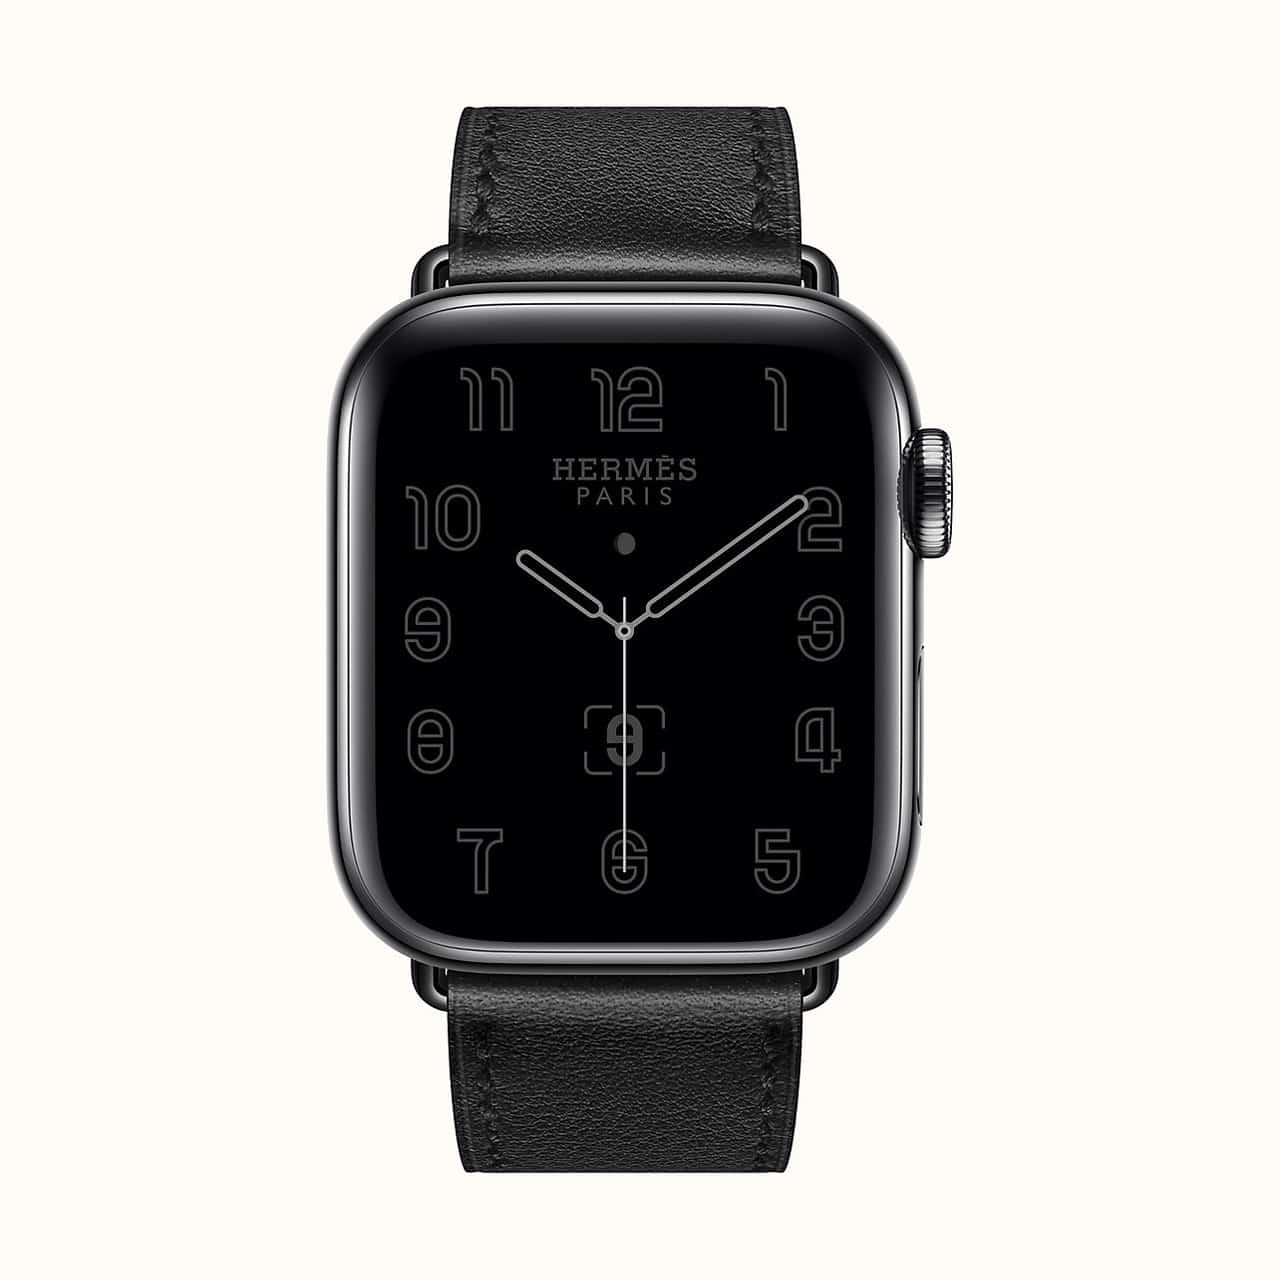 Shop HERMES 2021 SS Apple Watch Hermes - Swift Leather Single Tour by TOUHK